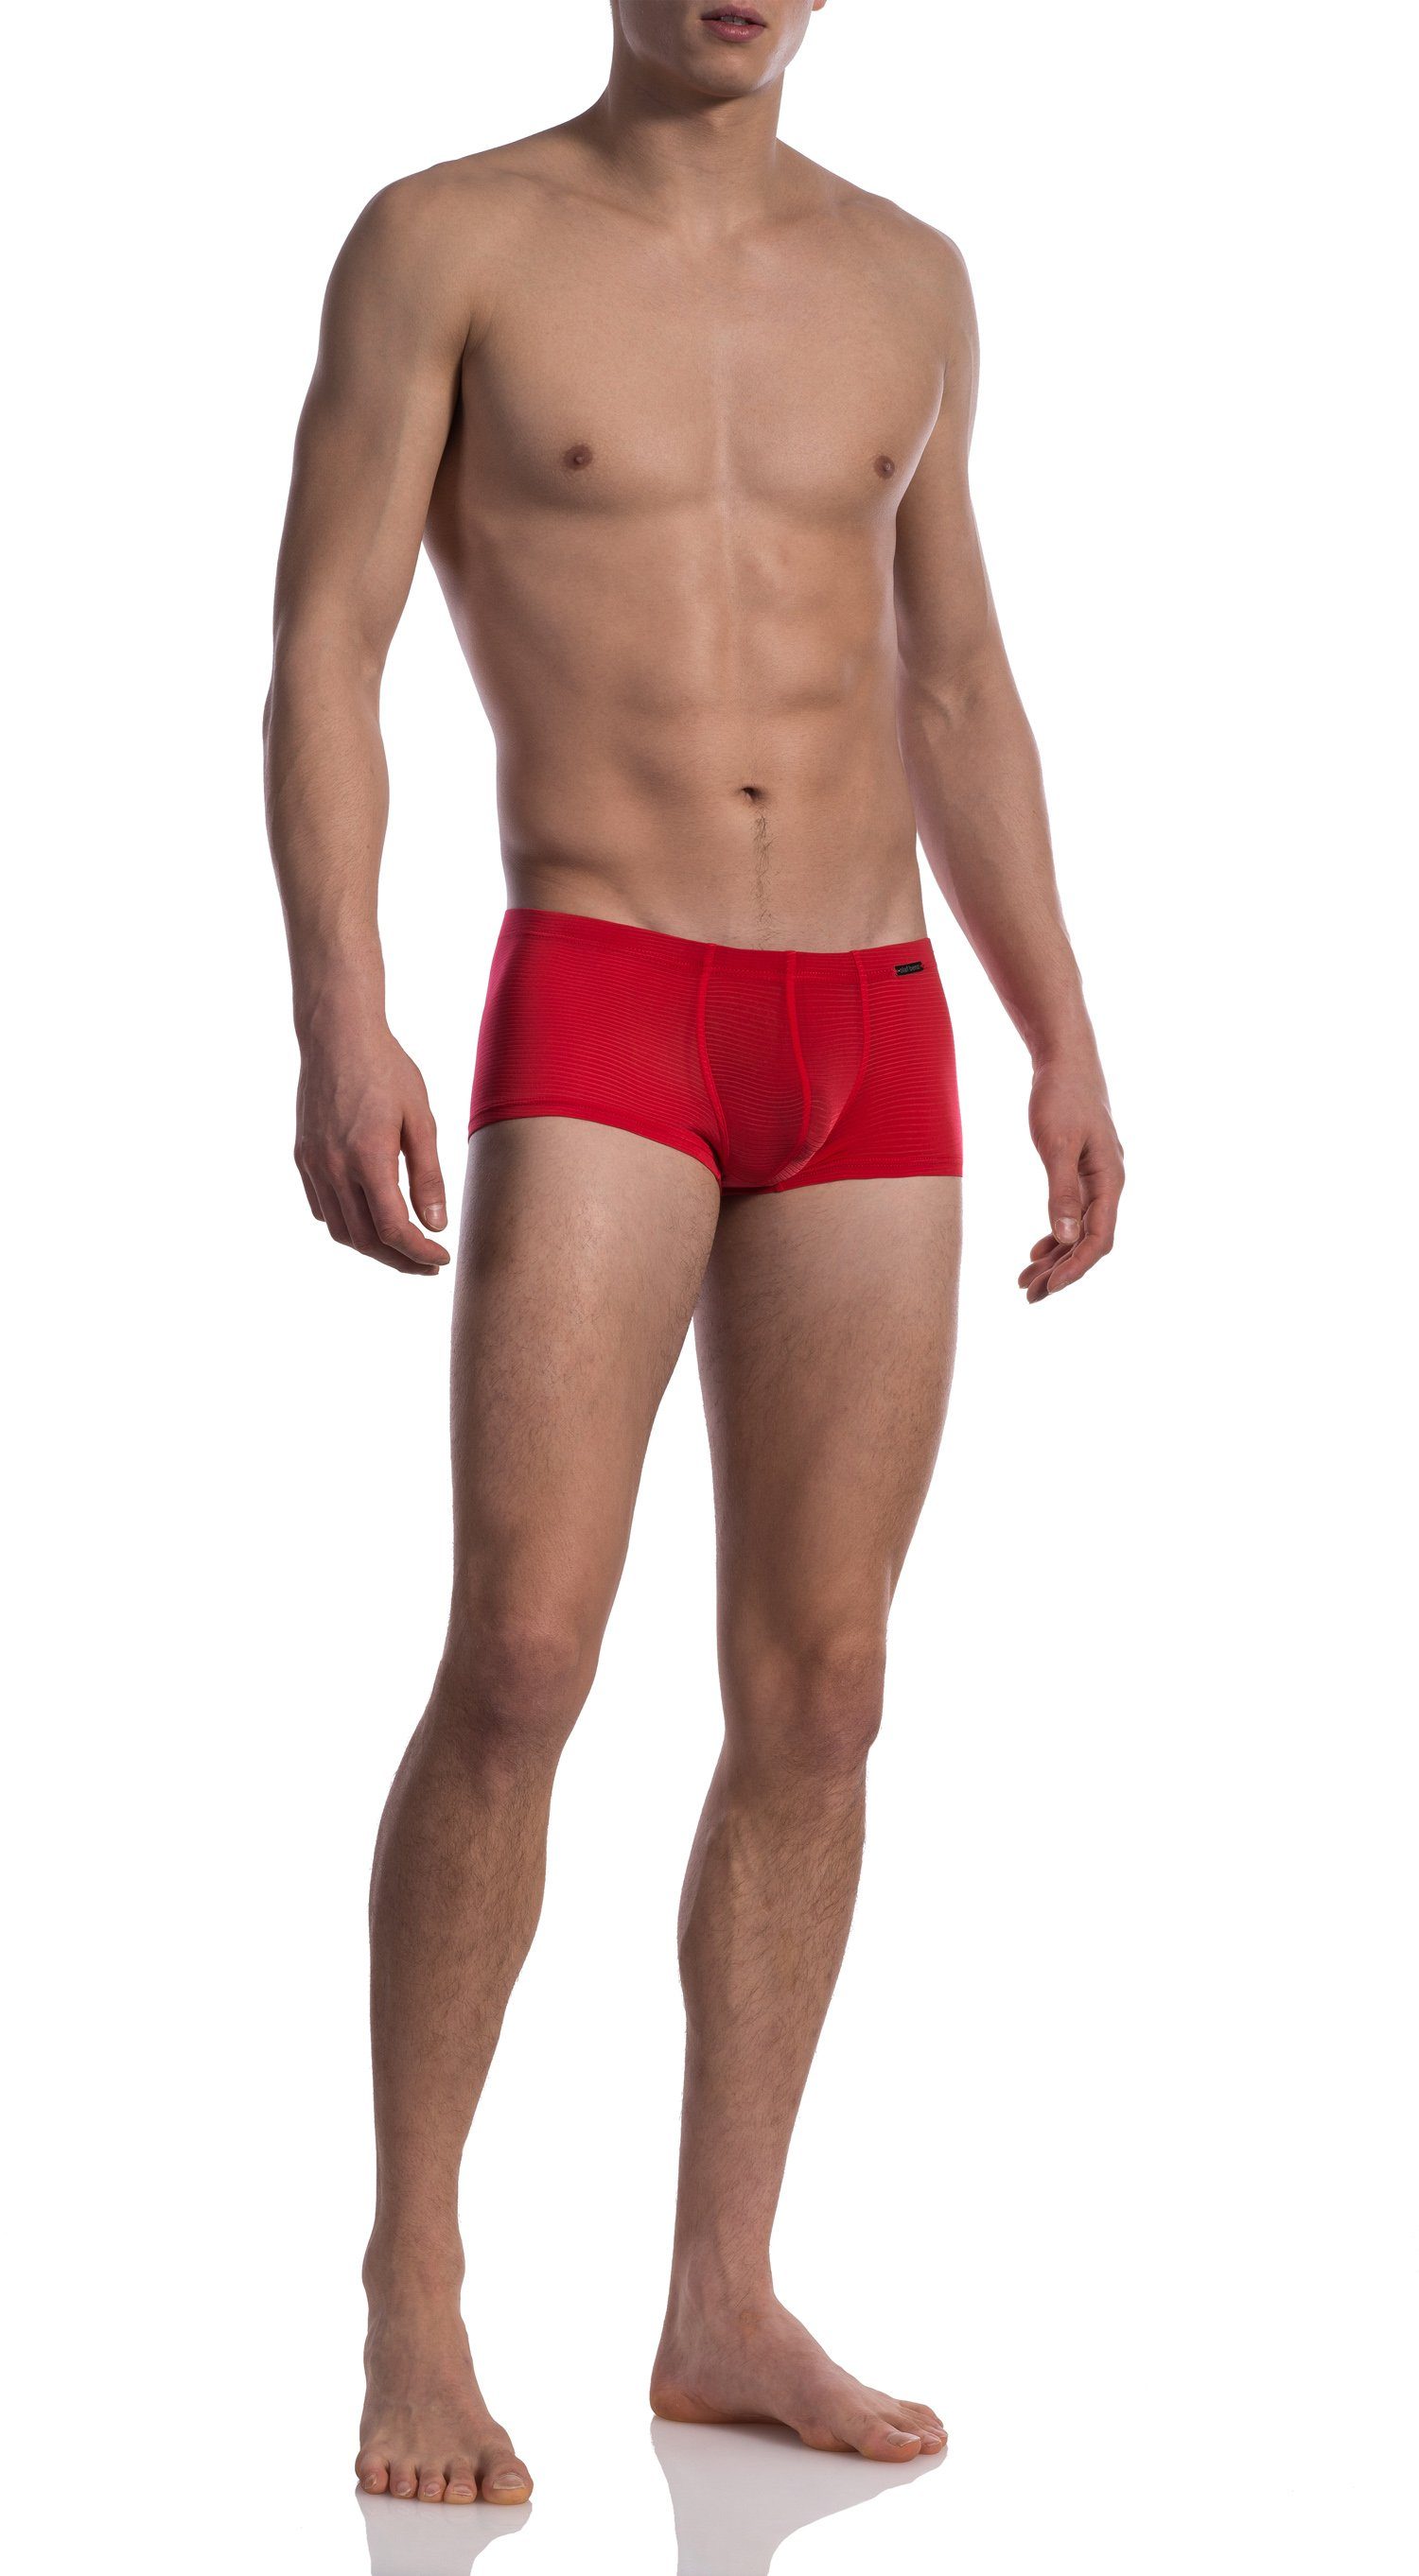 Olaf Benz Boxershorts Minipants Doppelpack 1201 2er-Pack) Rot RED (Packung